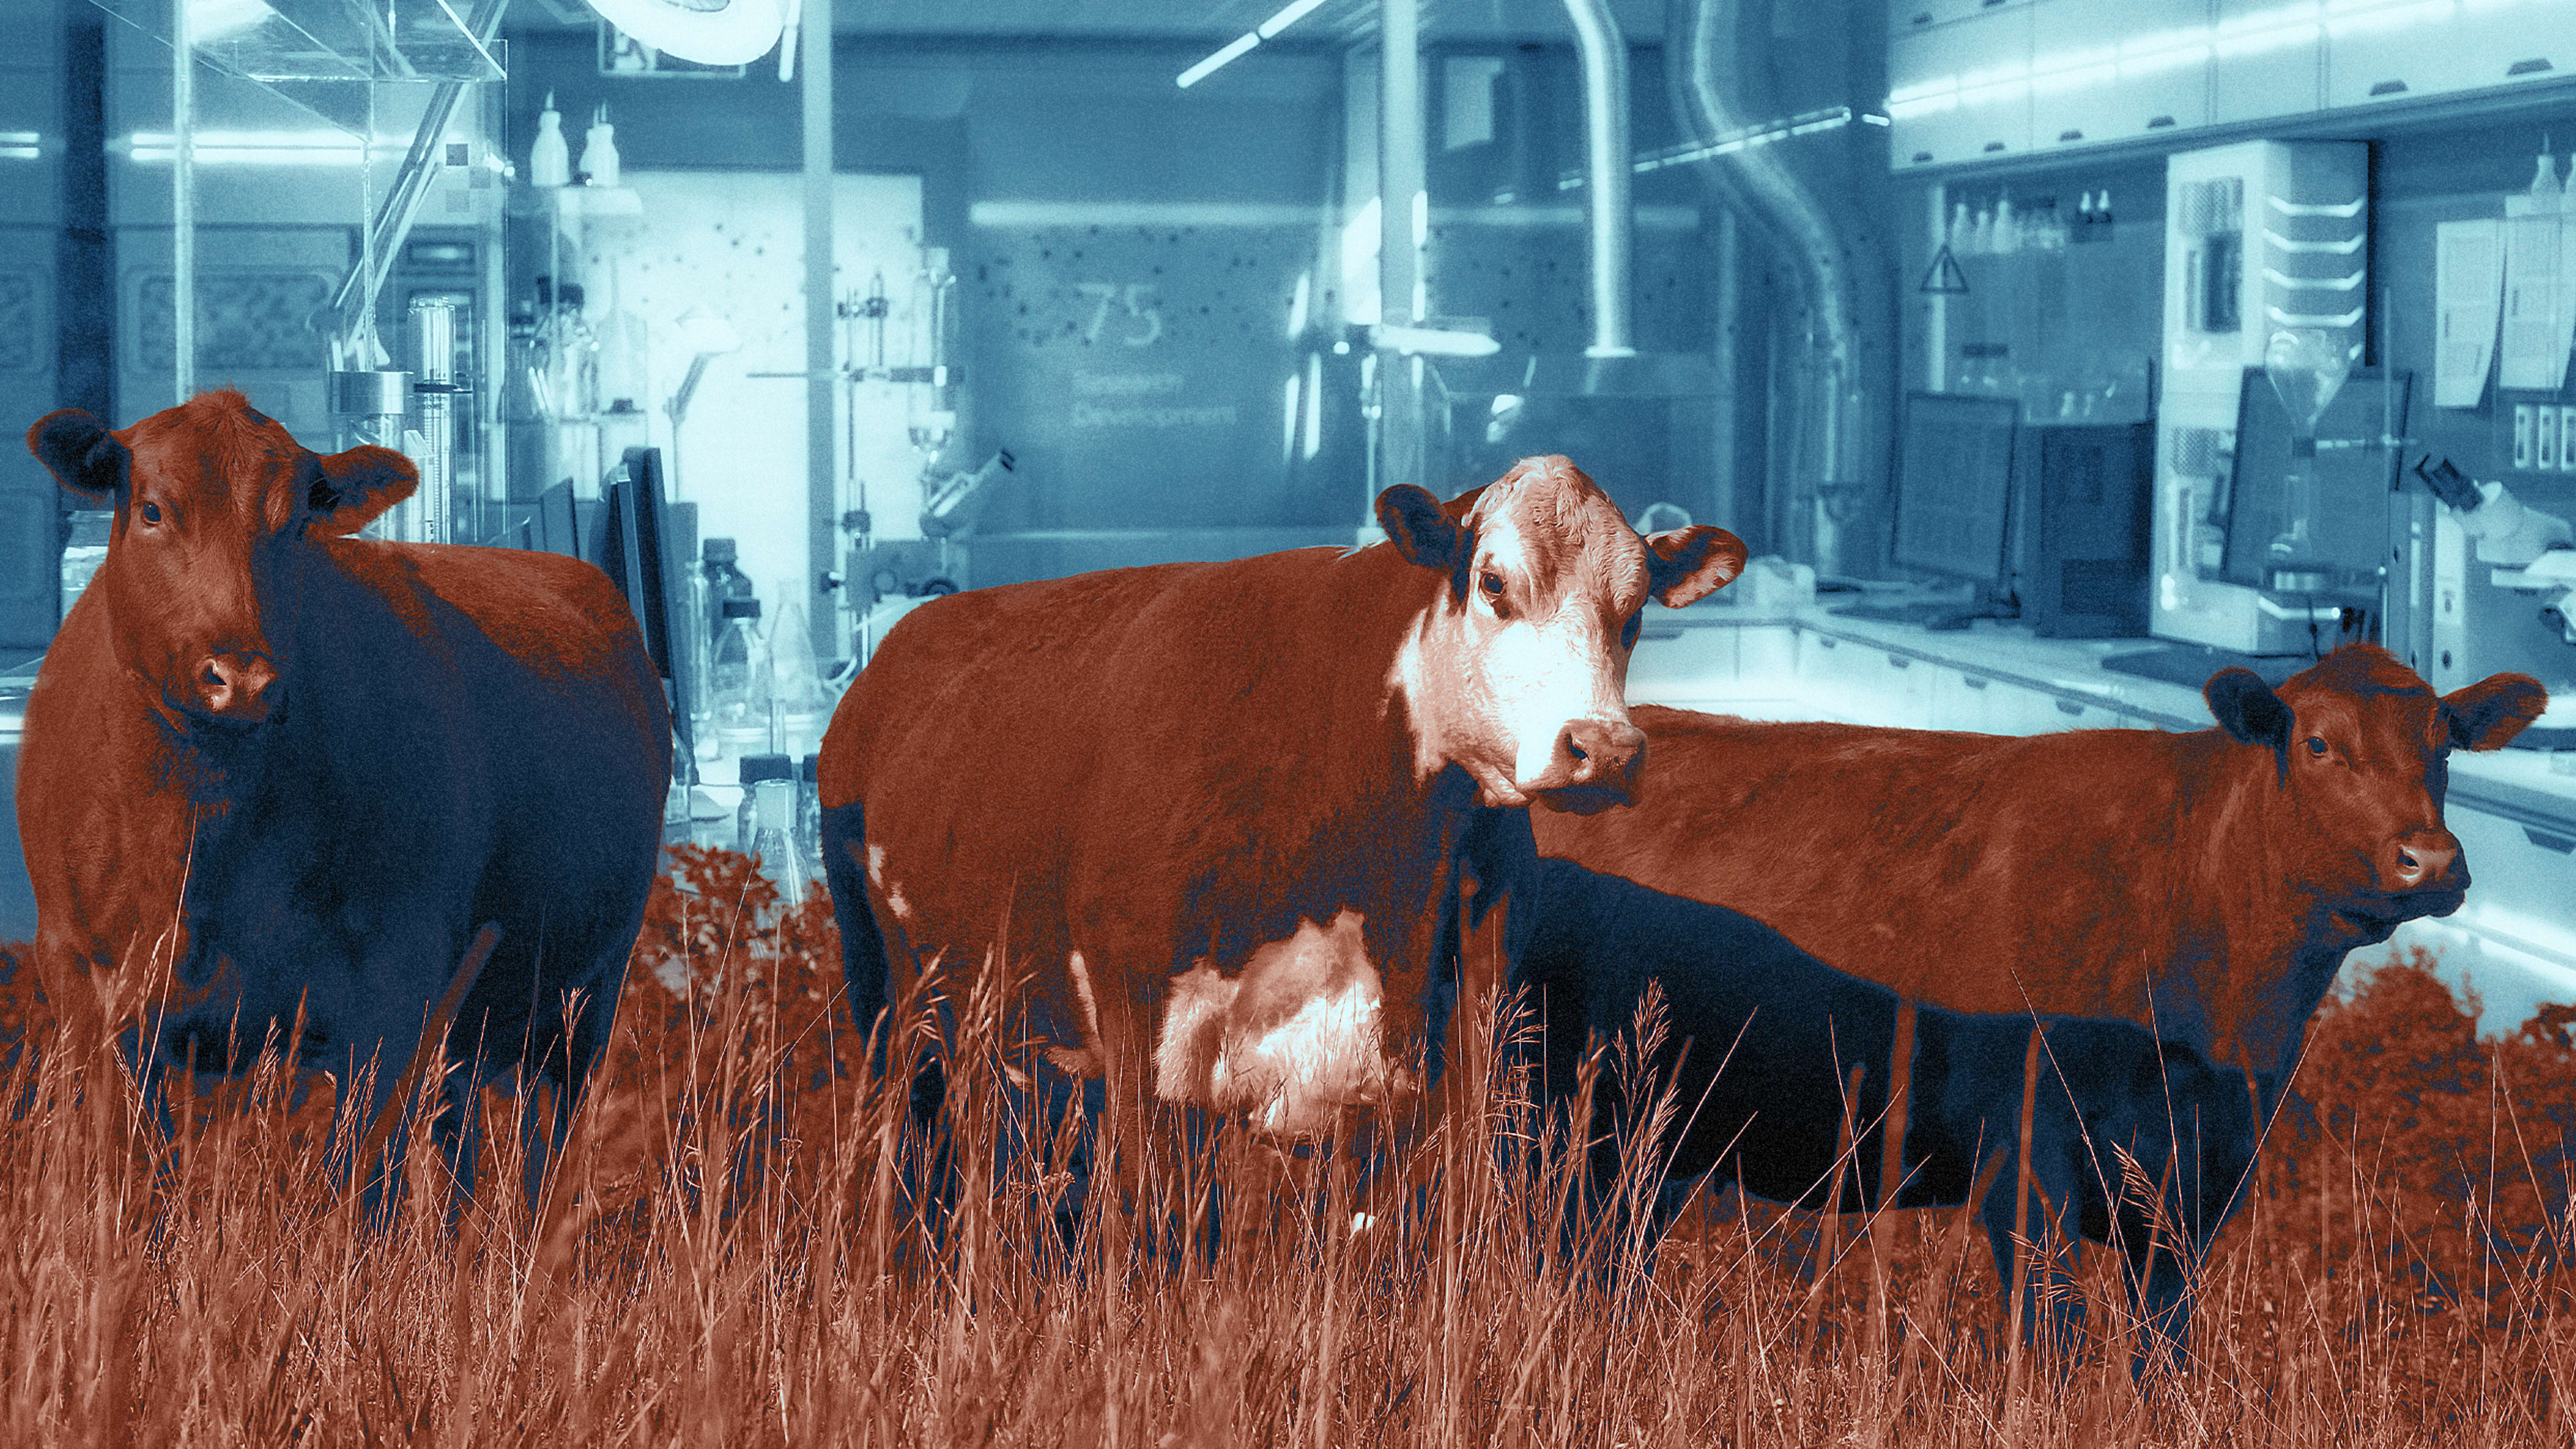 Once we have lab-grown meat, will we still need animal advocacy?